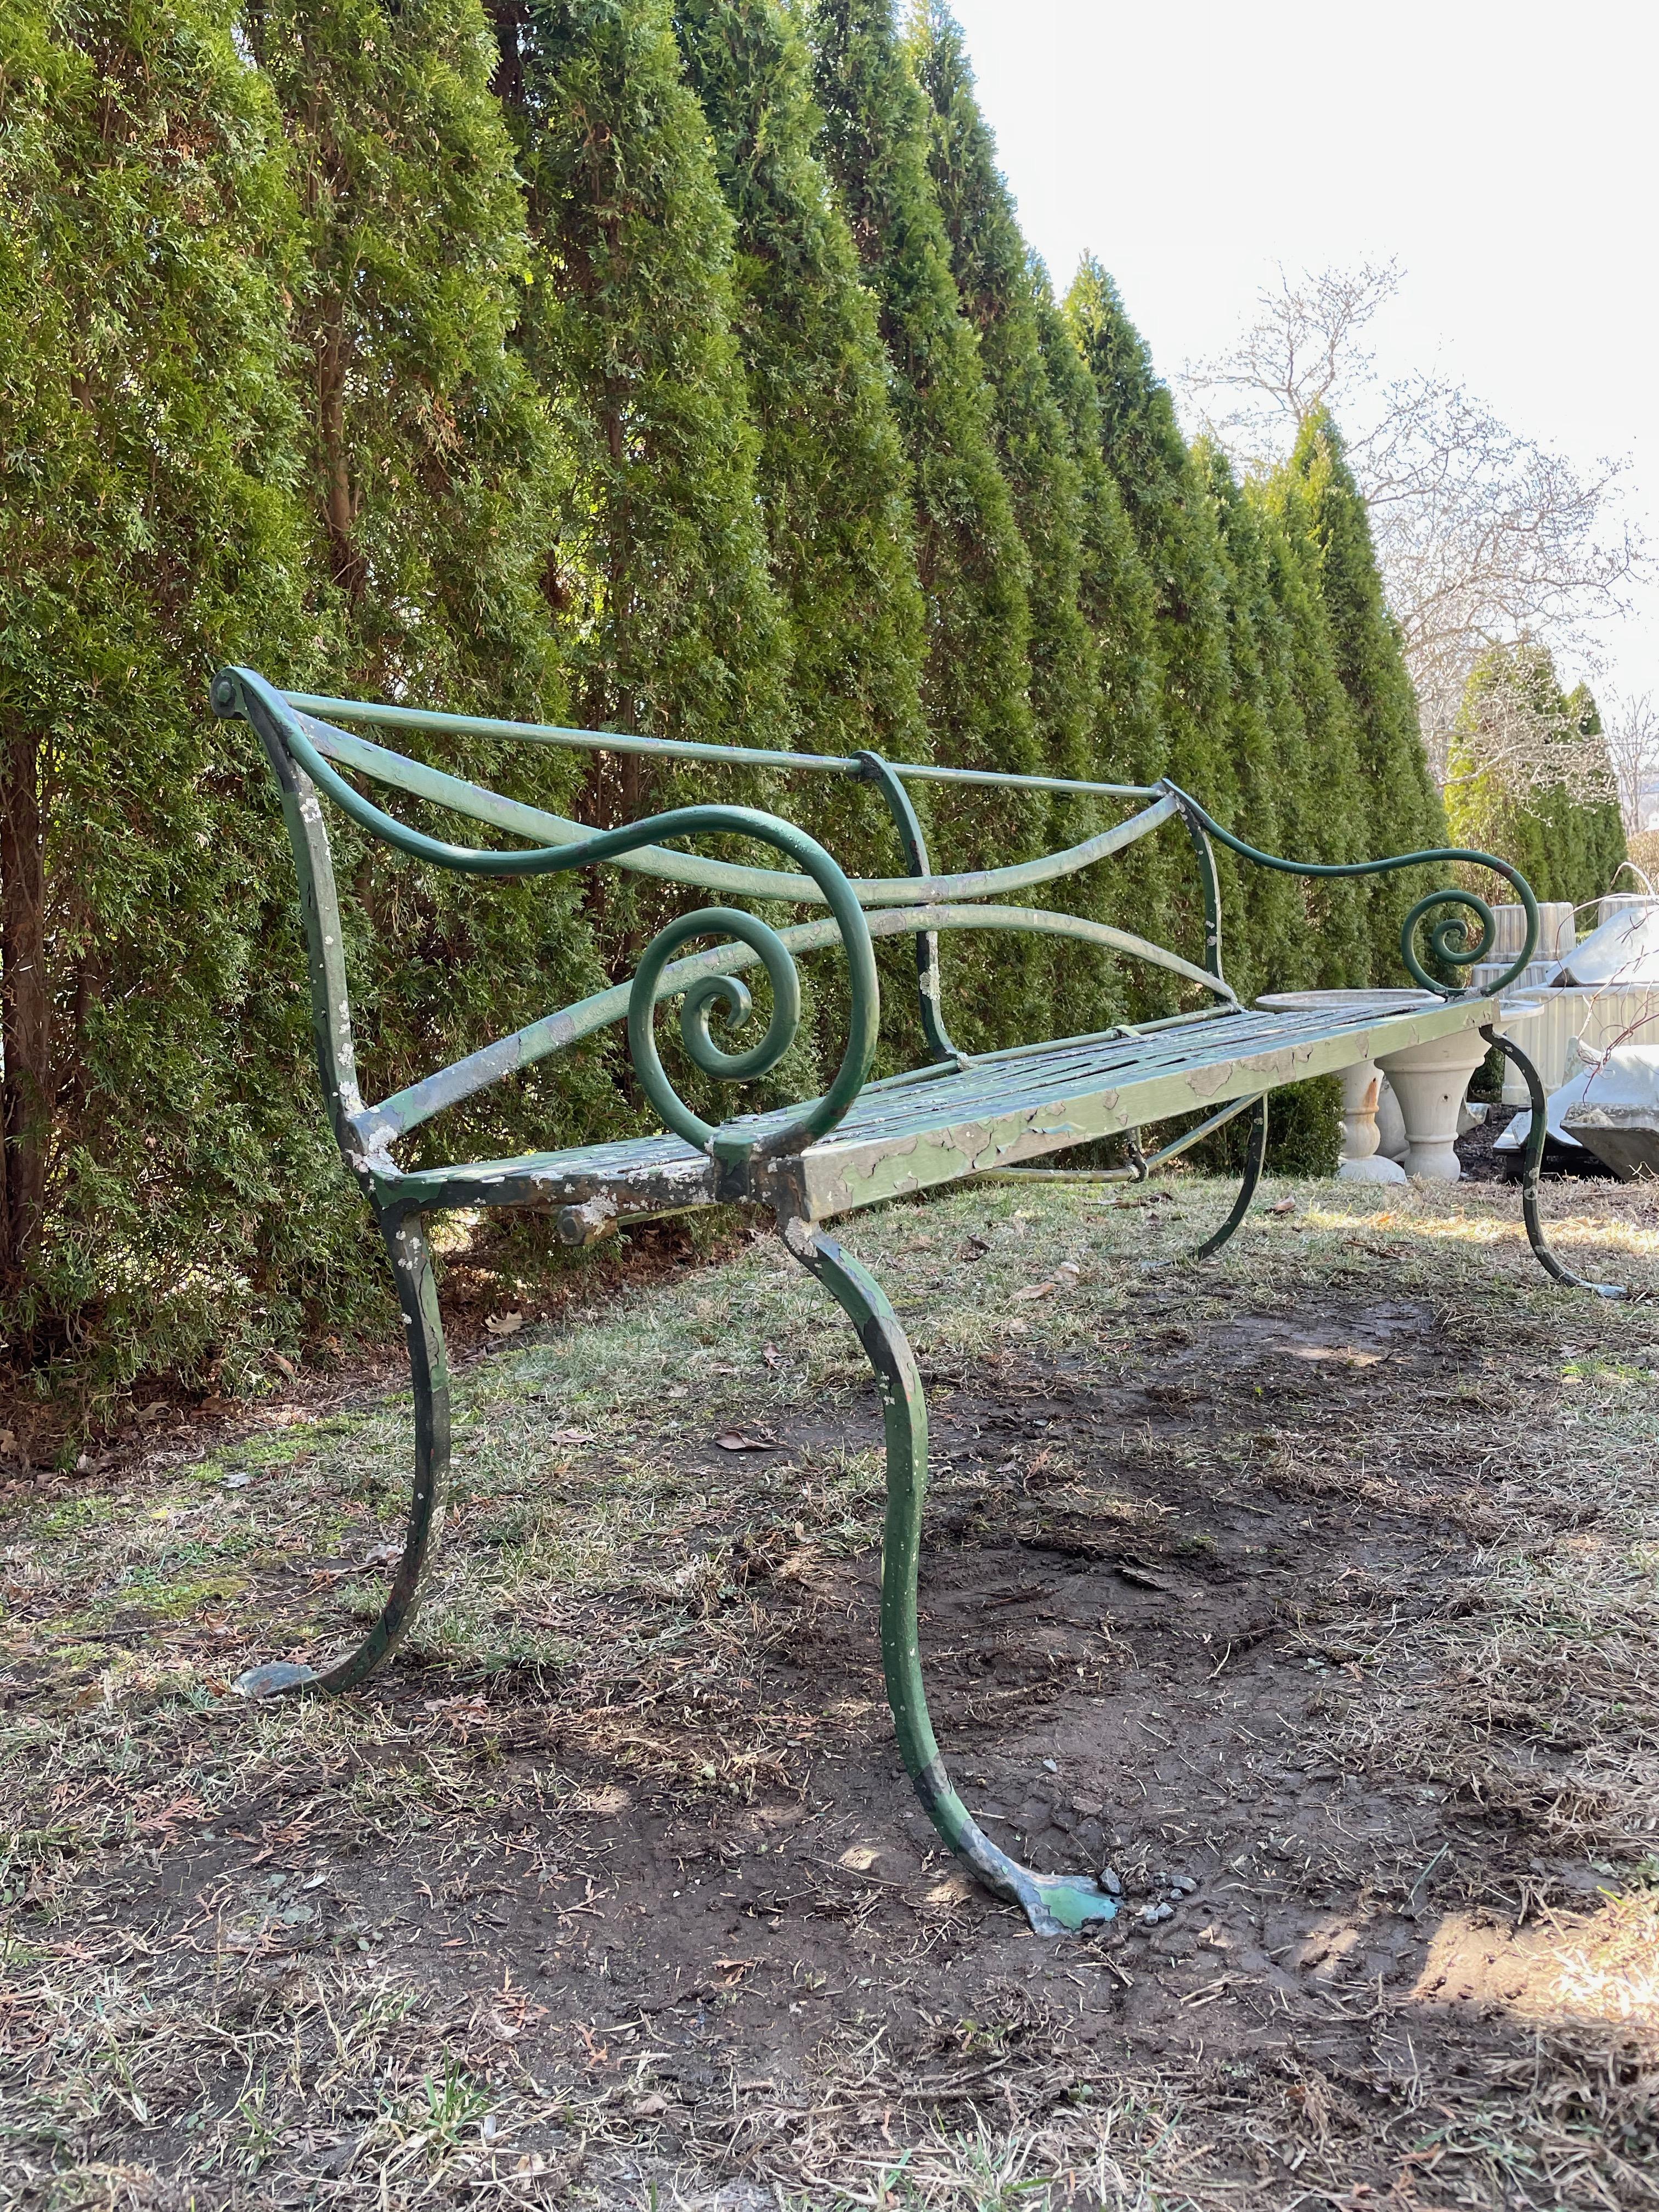 This is a fabulous hand-wrought iron bench in all respects and very comfortable as well. With an X-form back, slatted seats, scrolled arms, cabriole legs and two-penny feet, it ticks all our boxes. The surface comprises worn green paint that, in